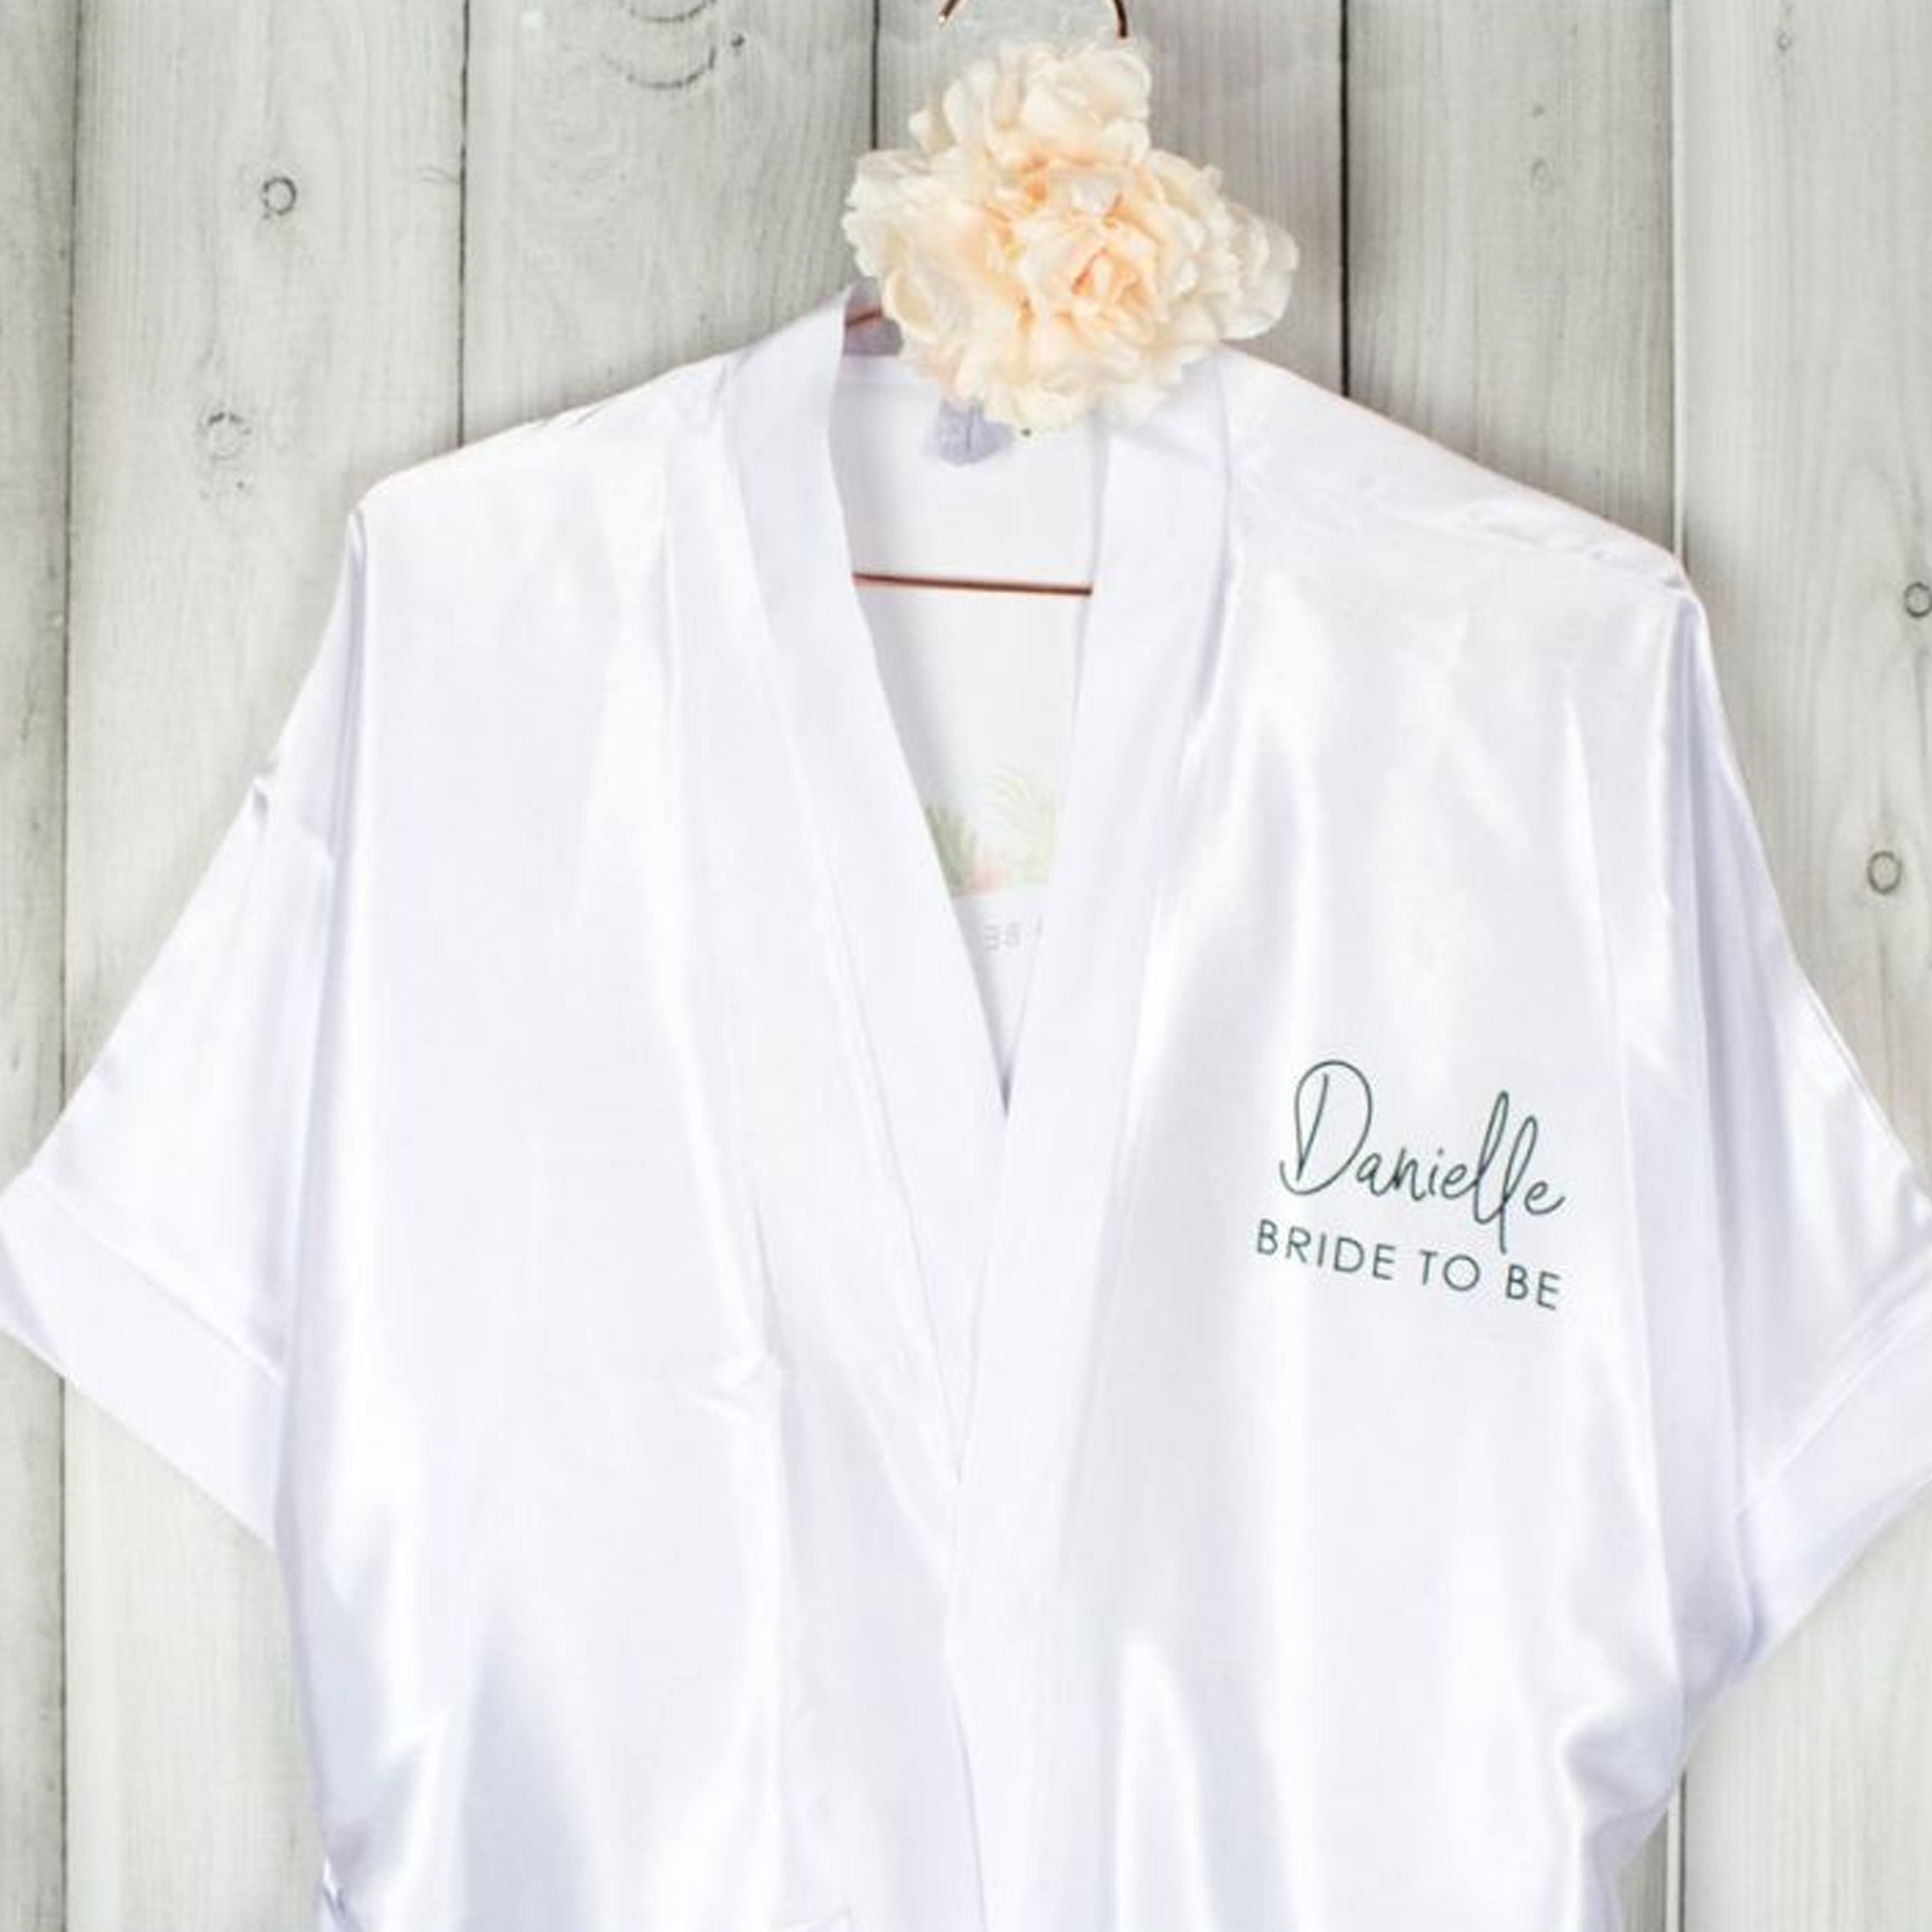 Personalised Hen Party Robe - Tropical